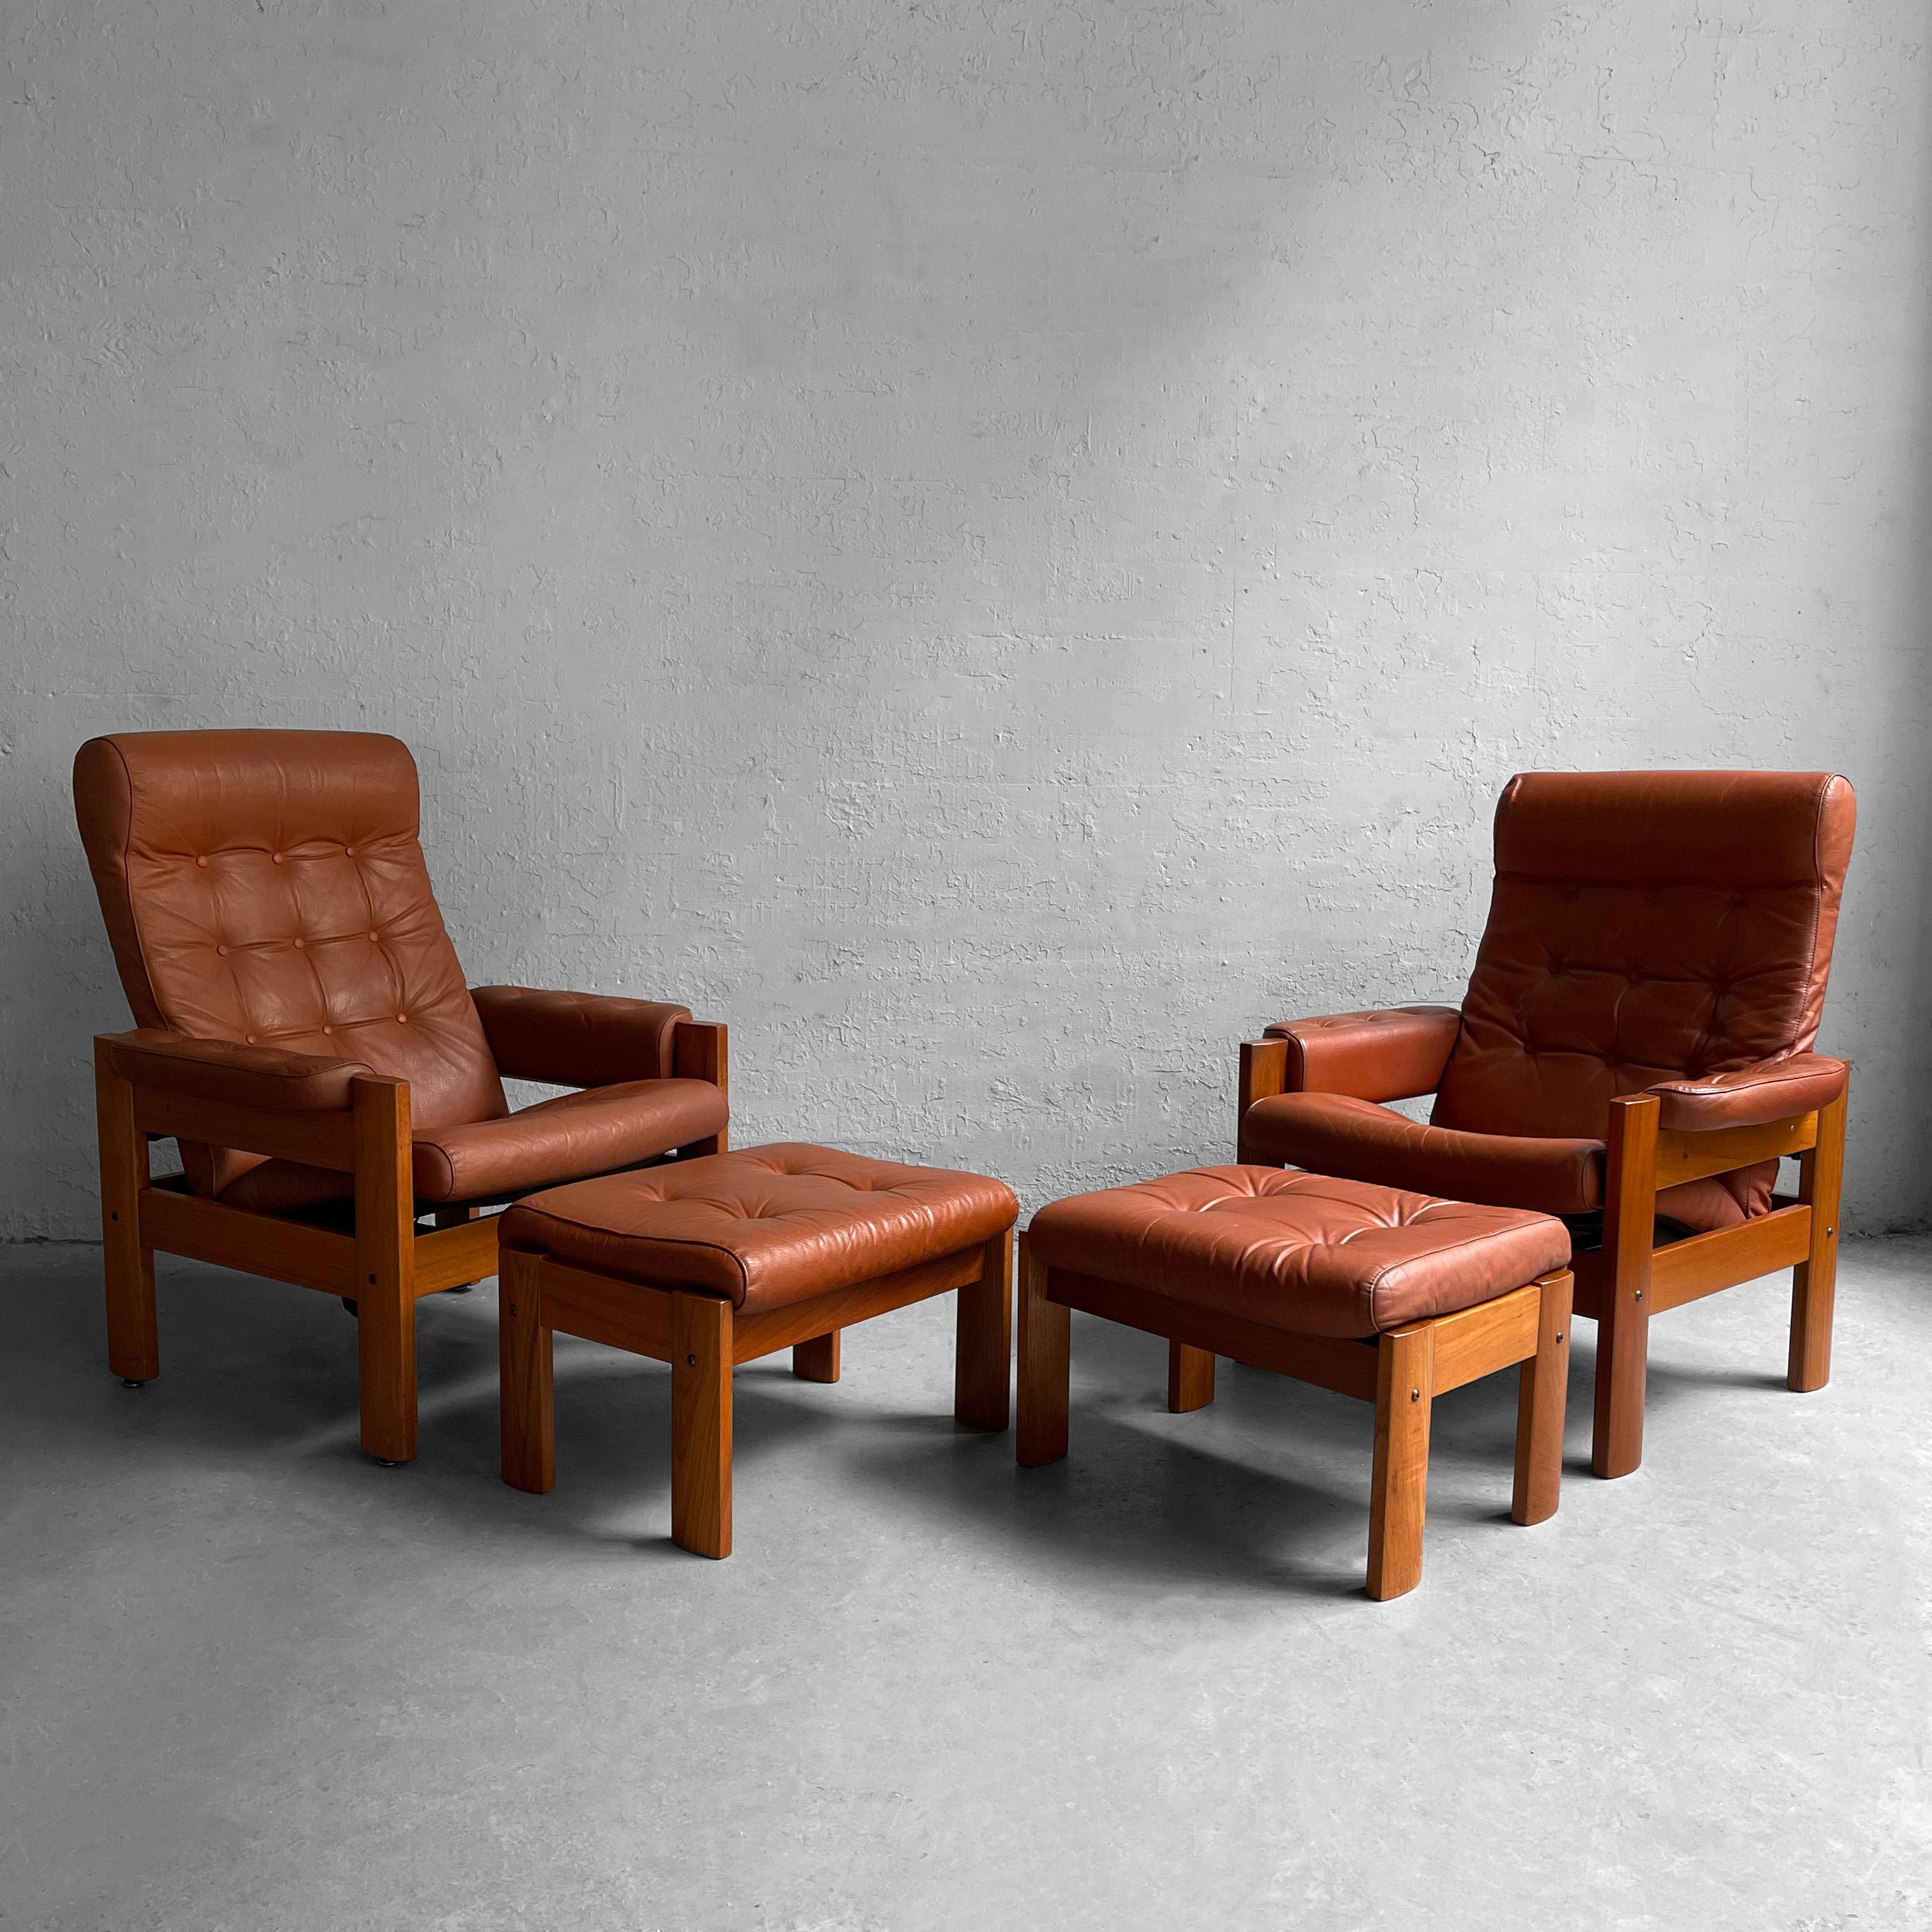 Pair of high back, Scandinavian modern, stressless recliners with matching ottomans, made in Norway by Ekornes feature teak frames with button tufted, lugguage tan leather upholstery. The chairs maneuver easily from upright to almost flat. The